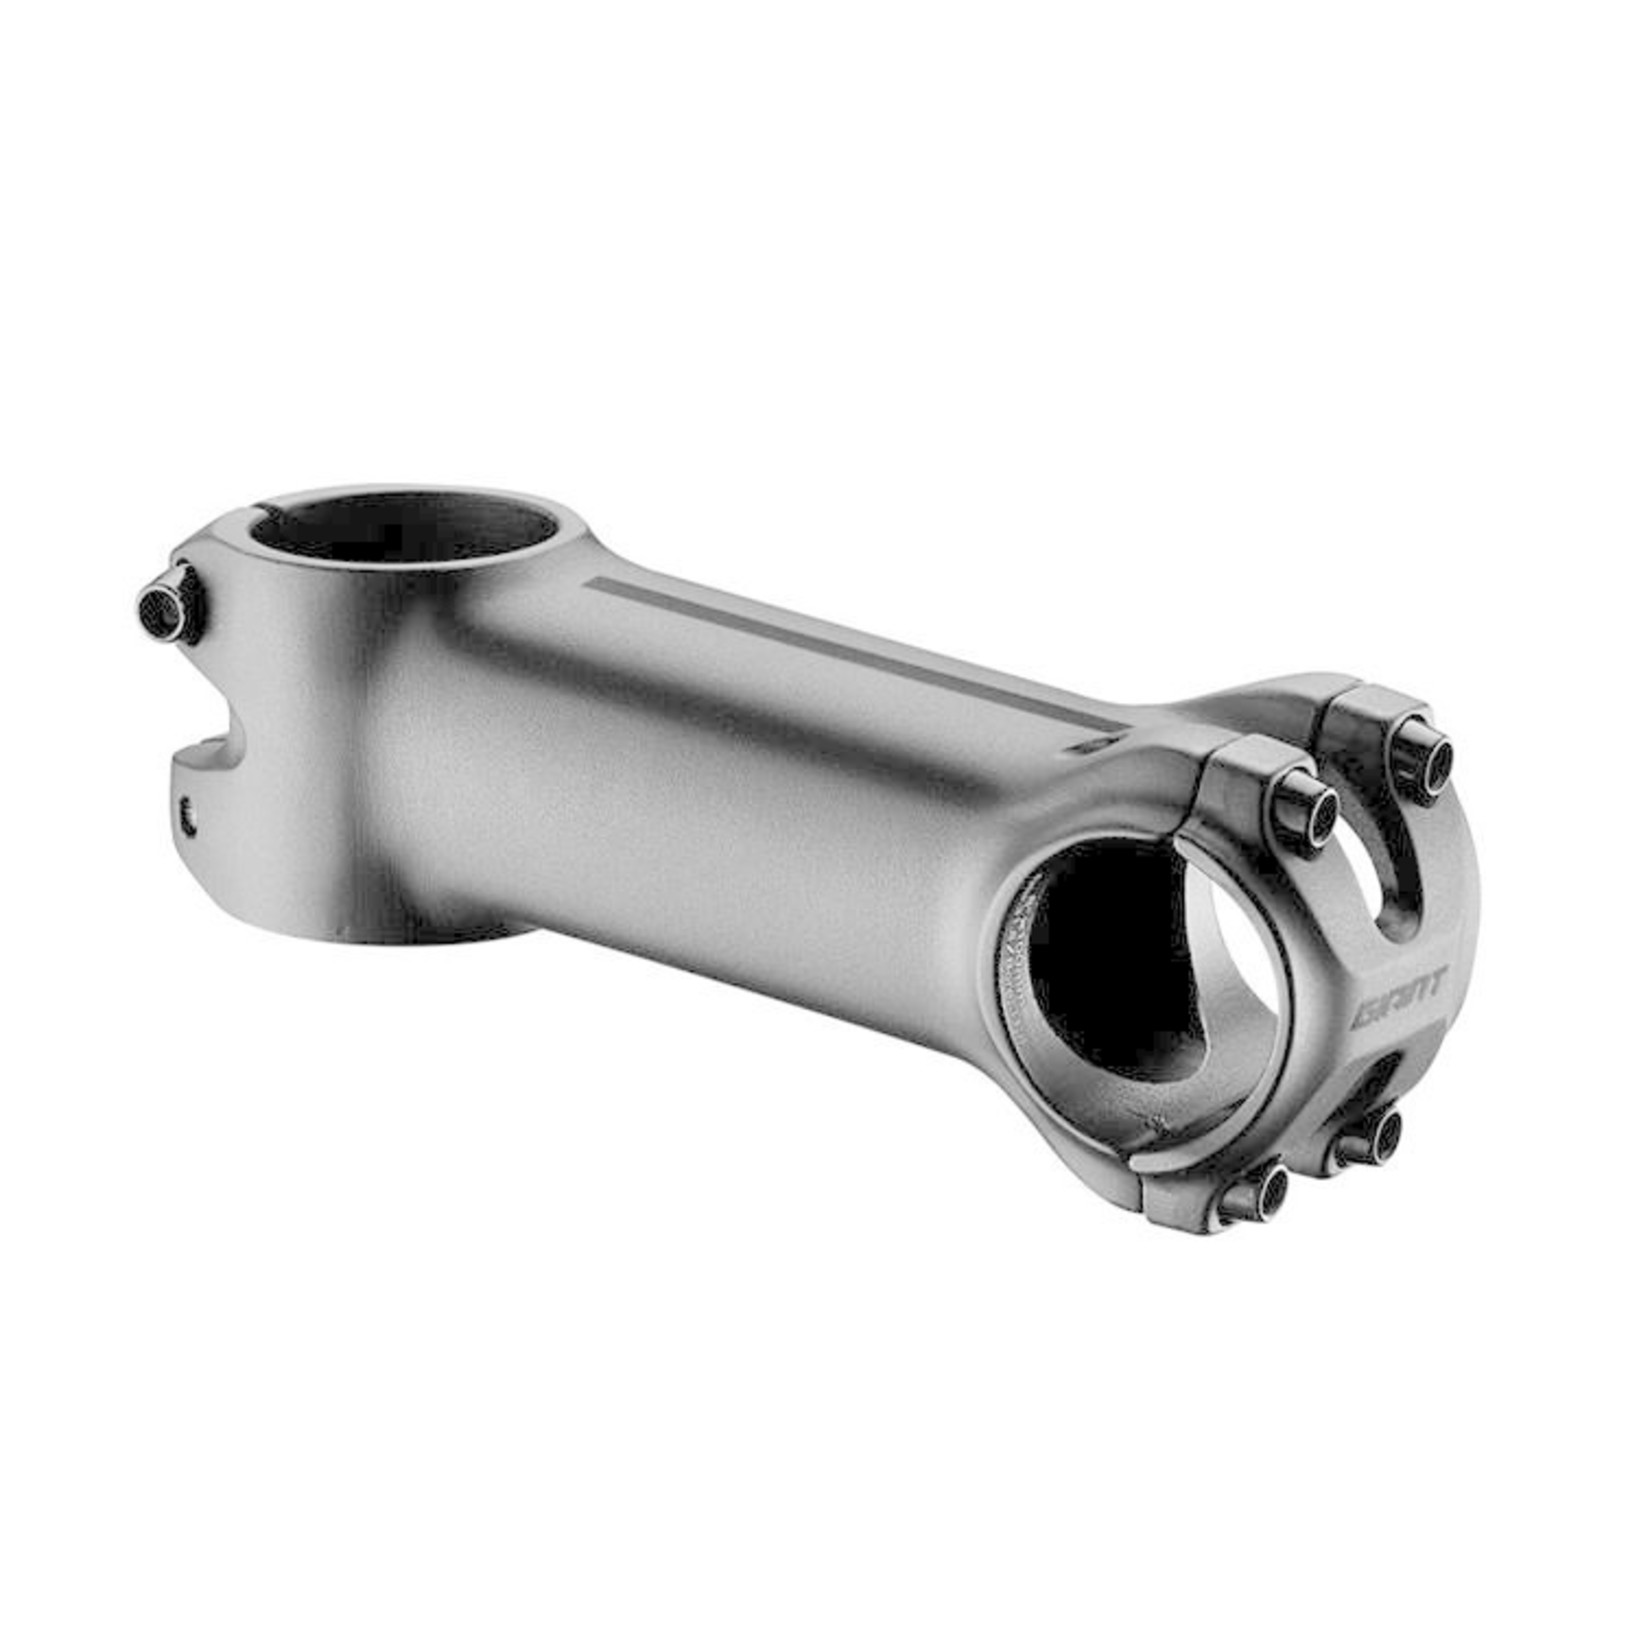 Giant Giant Contact OD2 100mm Stem